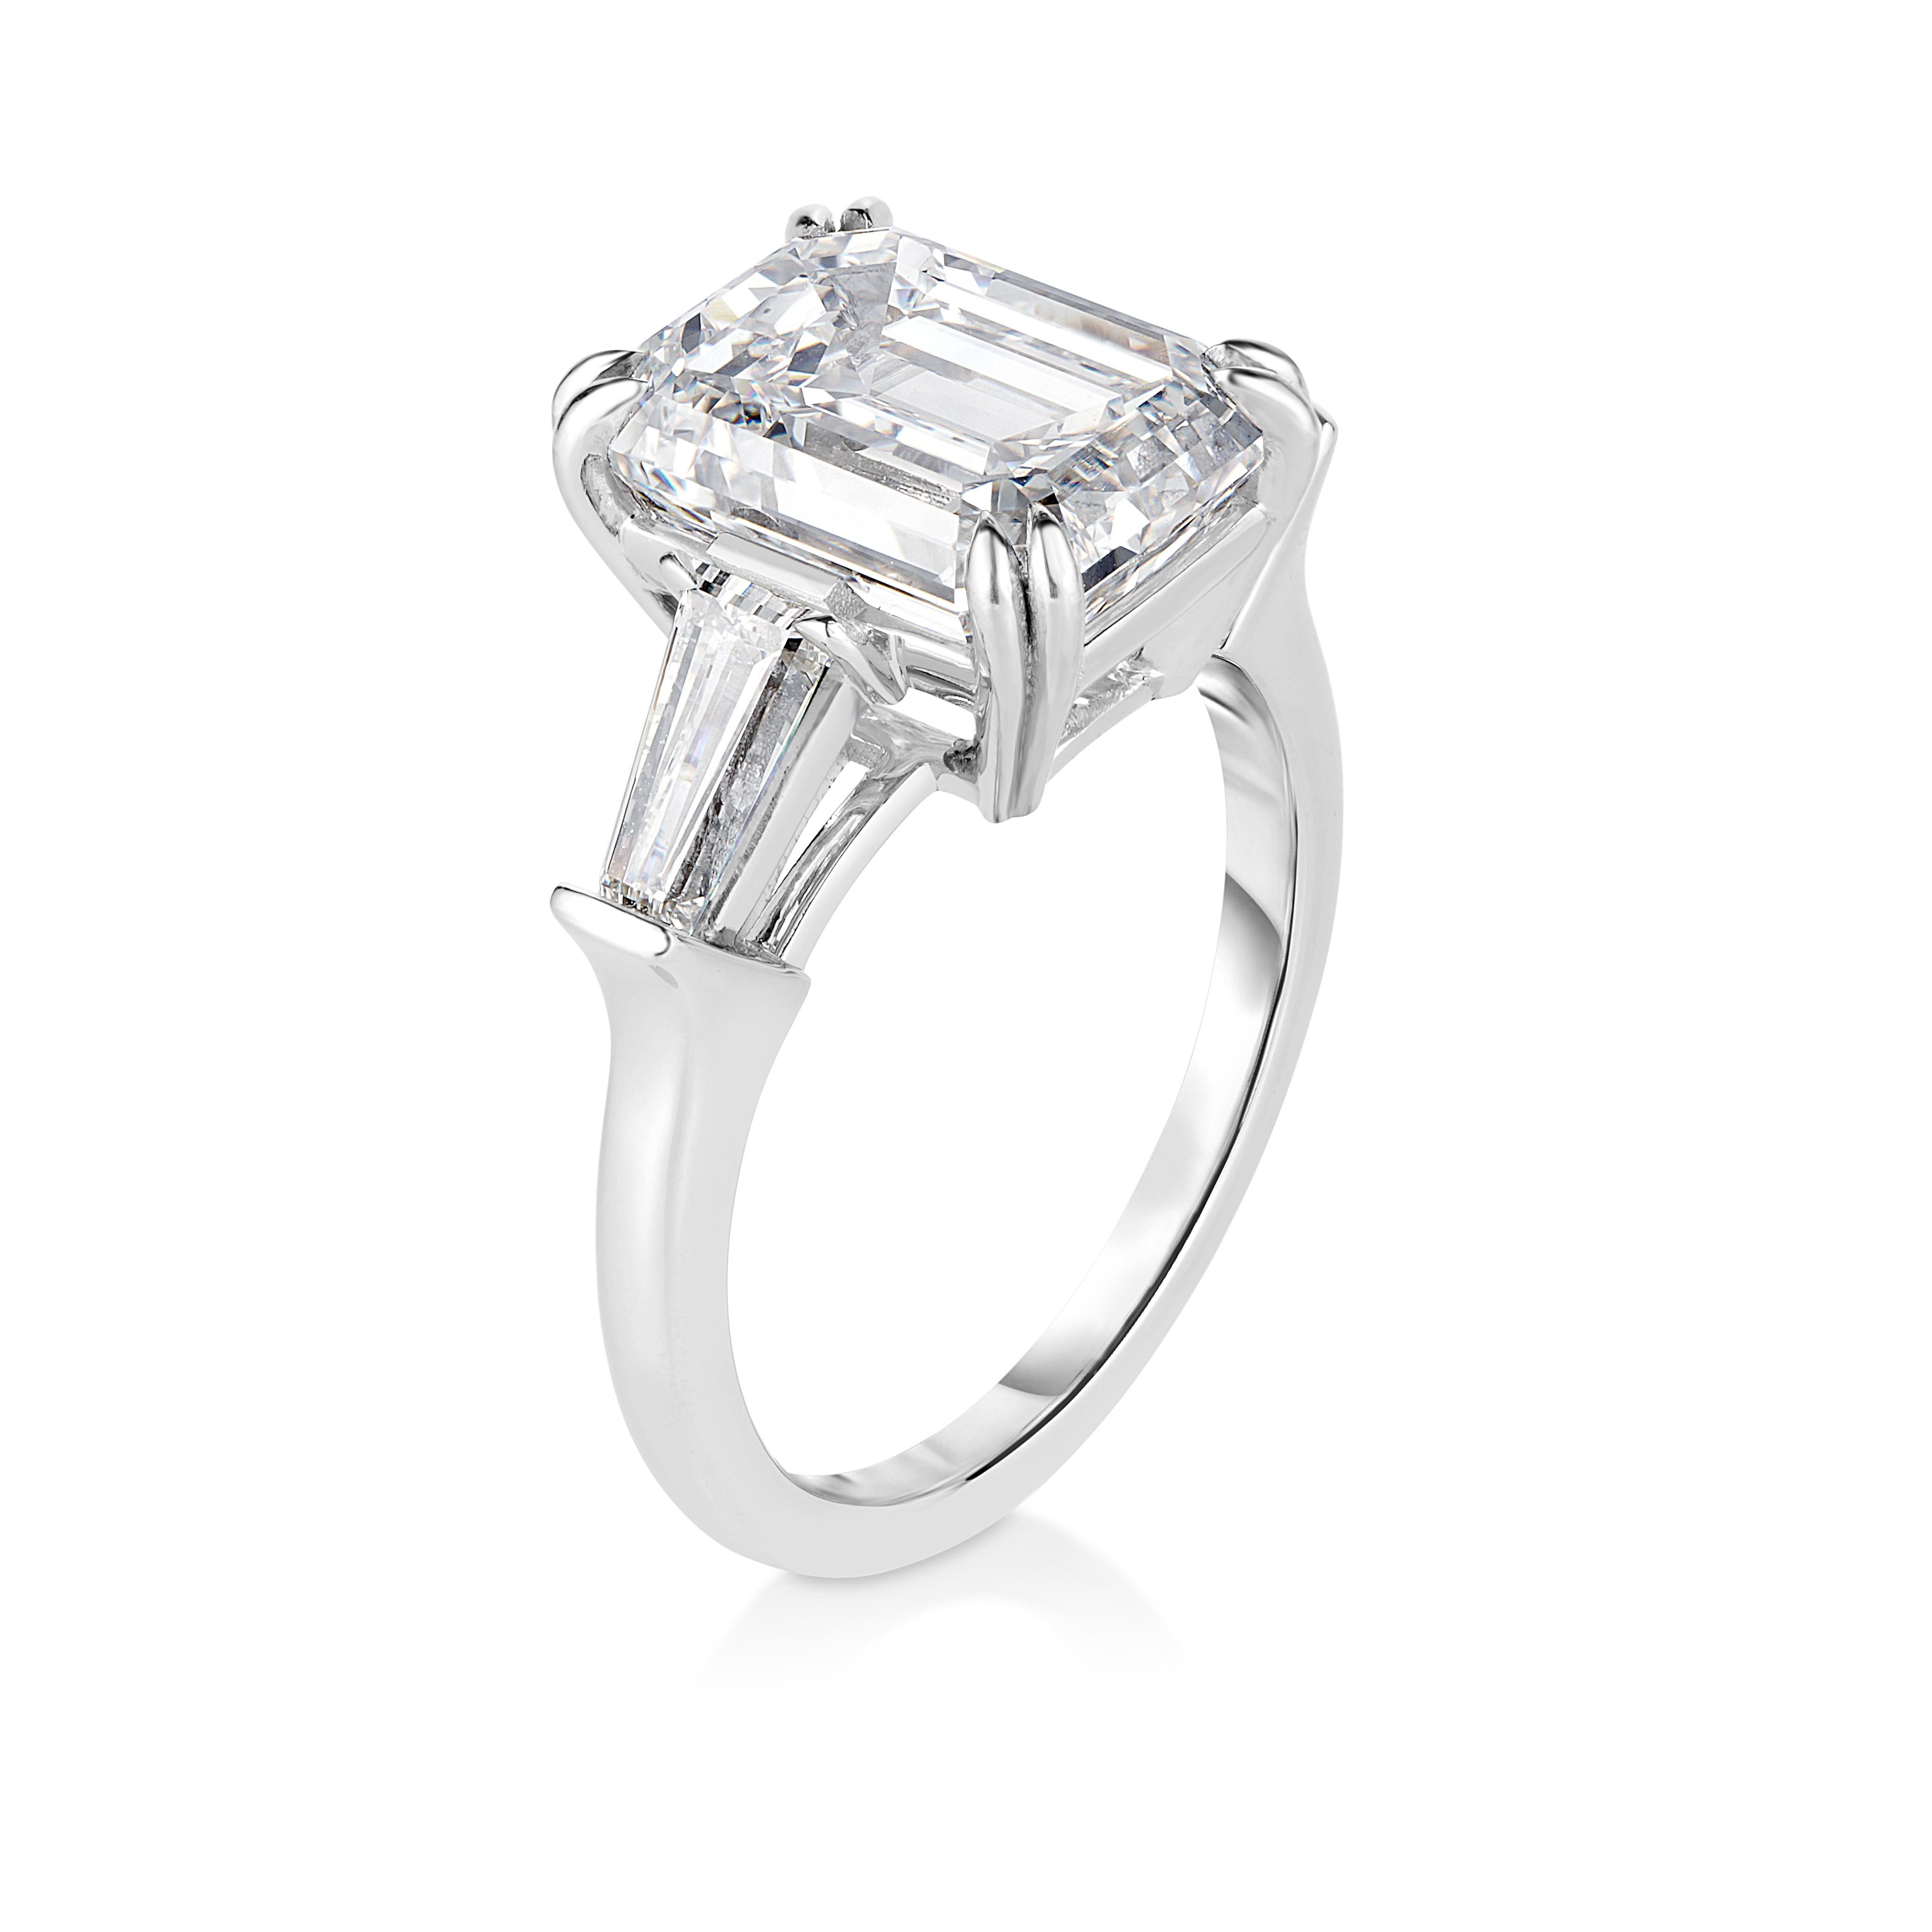 This exquisite 5 carat total weight engagement ring is crafted to captivate hearts and transcend generations, this magnificent piece features a breathtaking center stone—a 4.32 carat GIA Certified Emerald Cut diamond, I Color VVS2 Clarity and